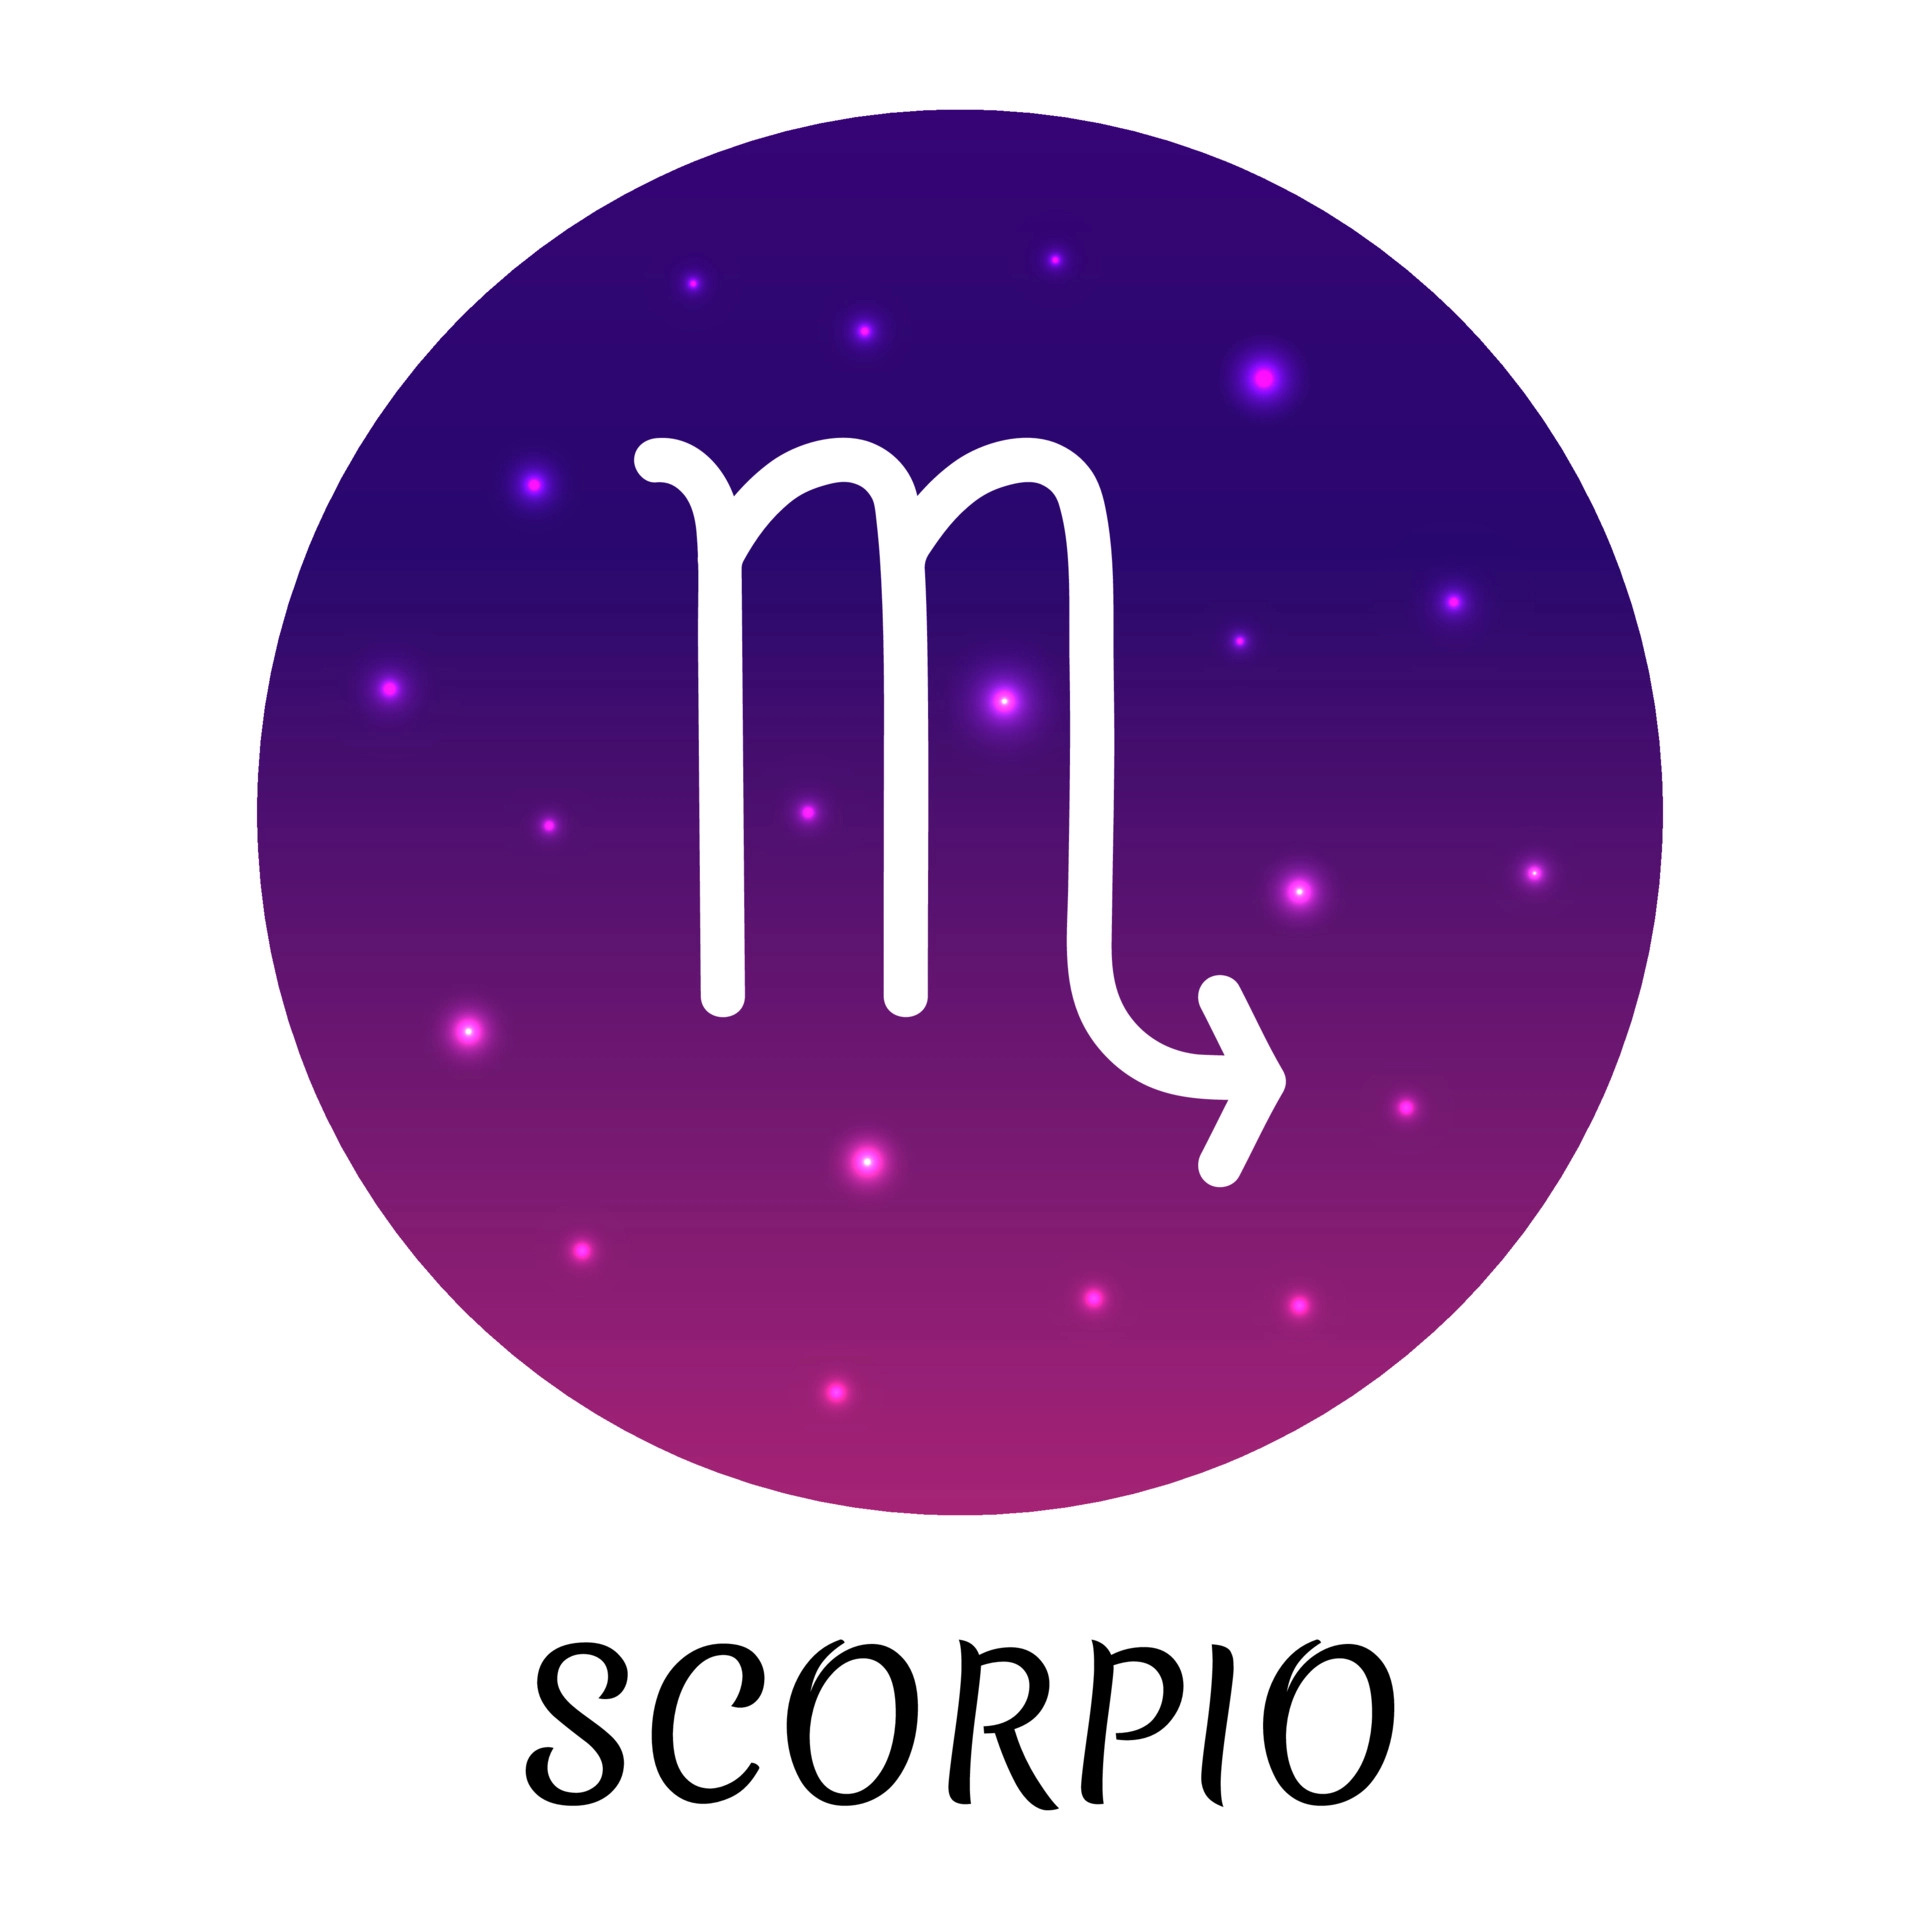 Zodiac sign Scorpio, Isolated vector icon, Starry gradient design, Astrological element, 1920x1920 HD Handy